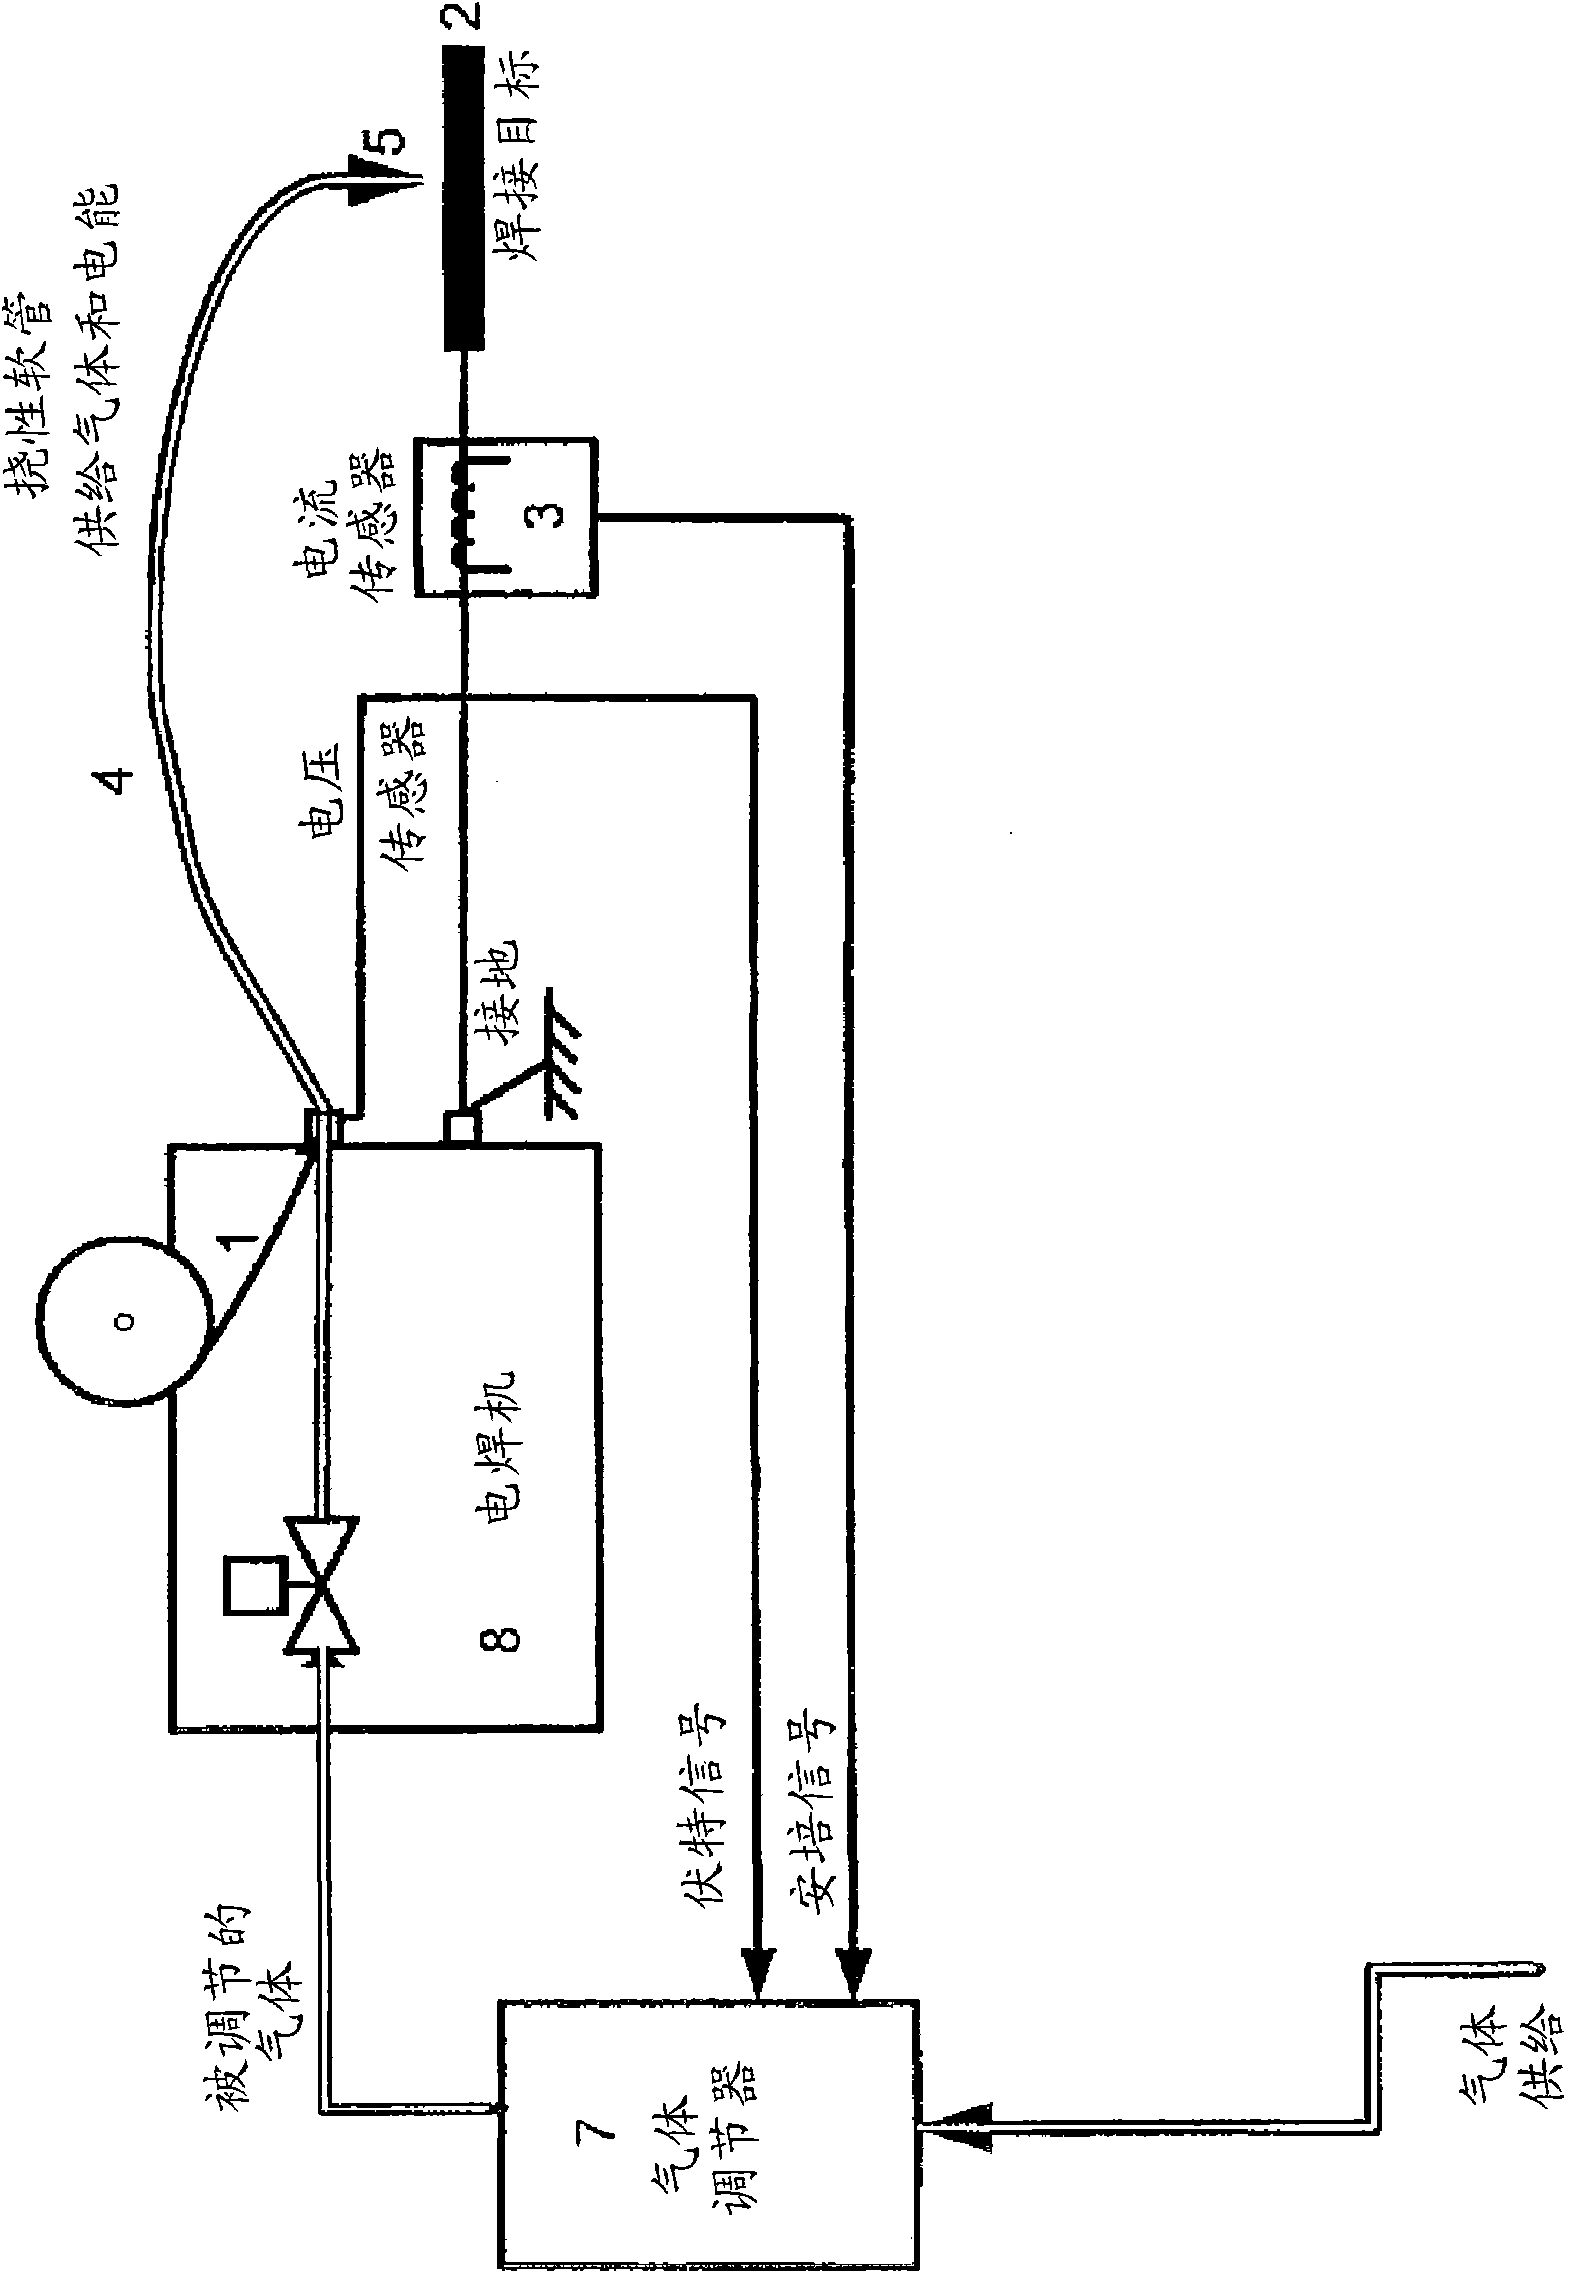 Arrangement and method for blanket gas supply control for an electrical welding apparatus